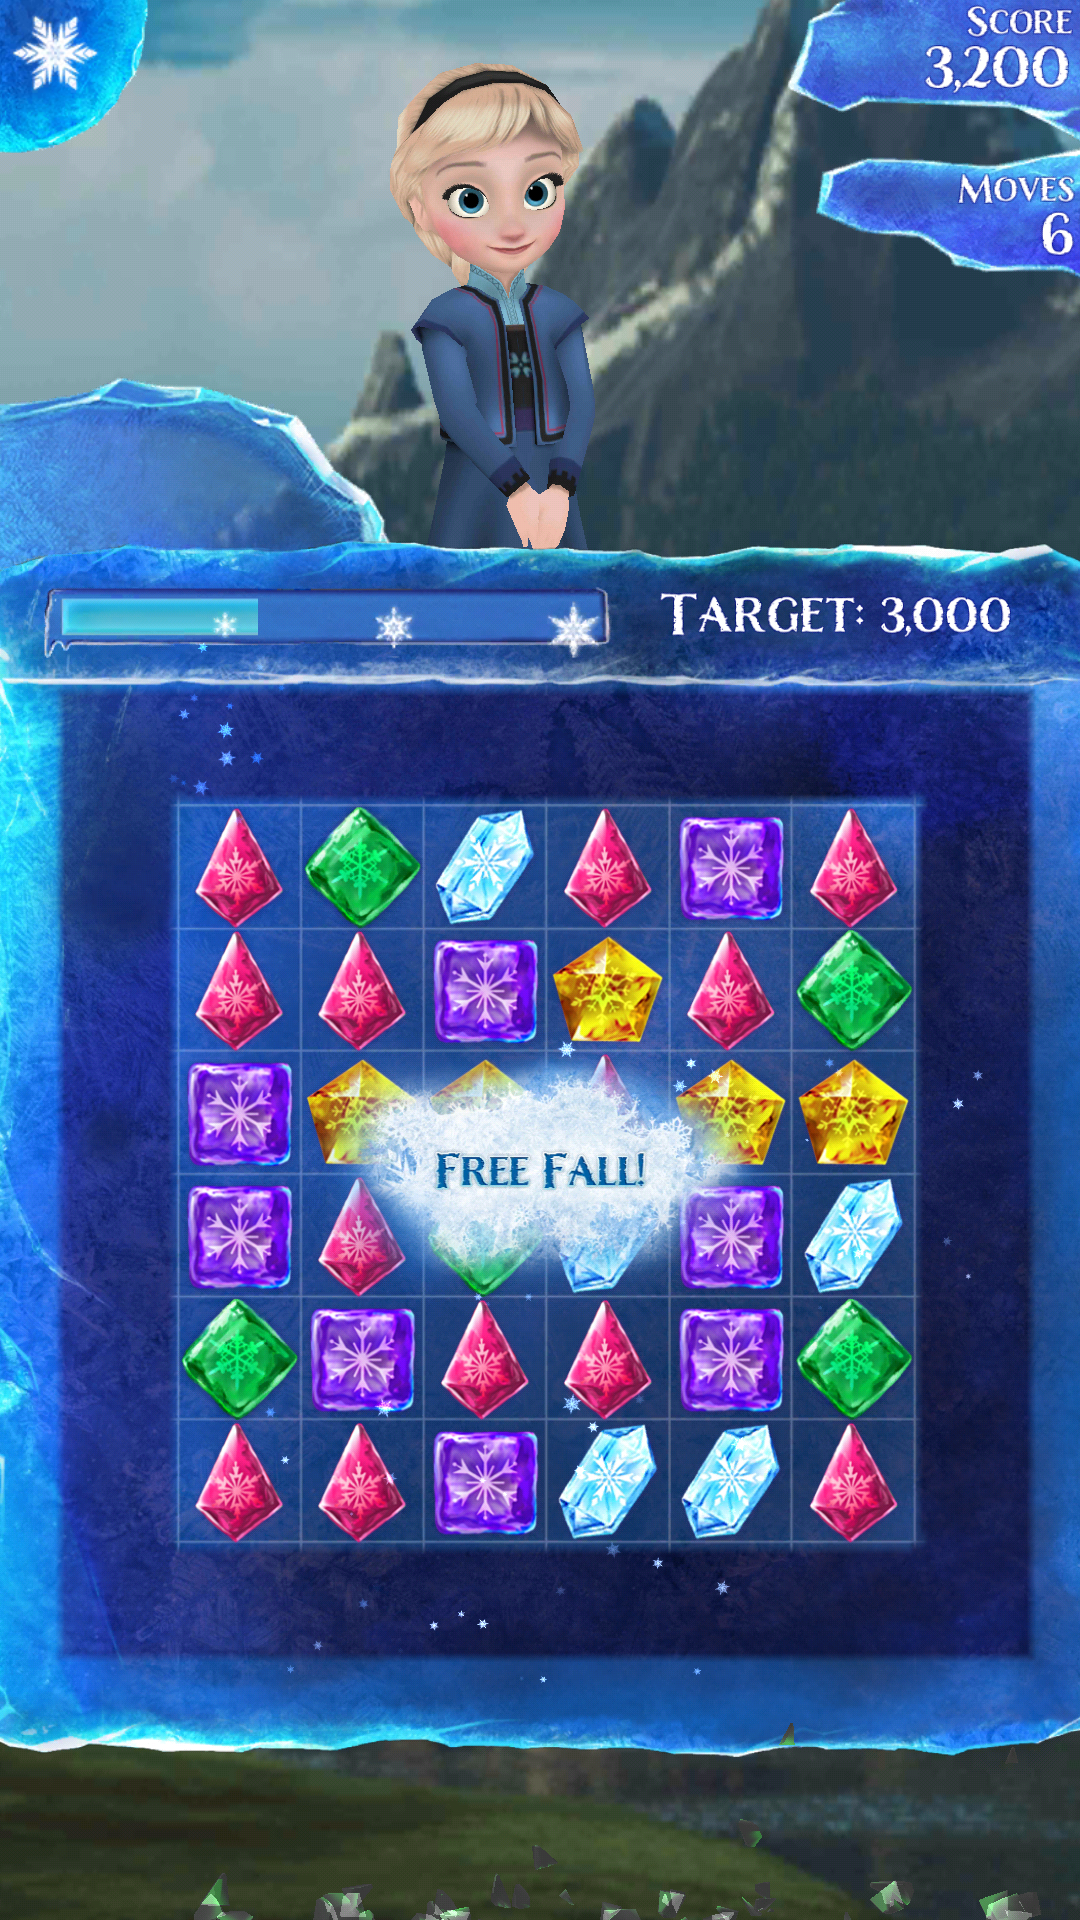 Disney Frozen Free Fall - Play Frozen Puzzle Games(Large physical strength)